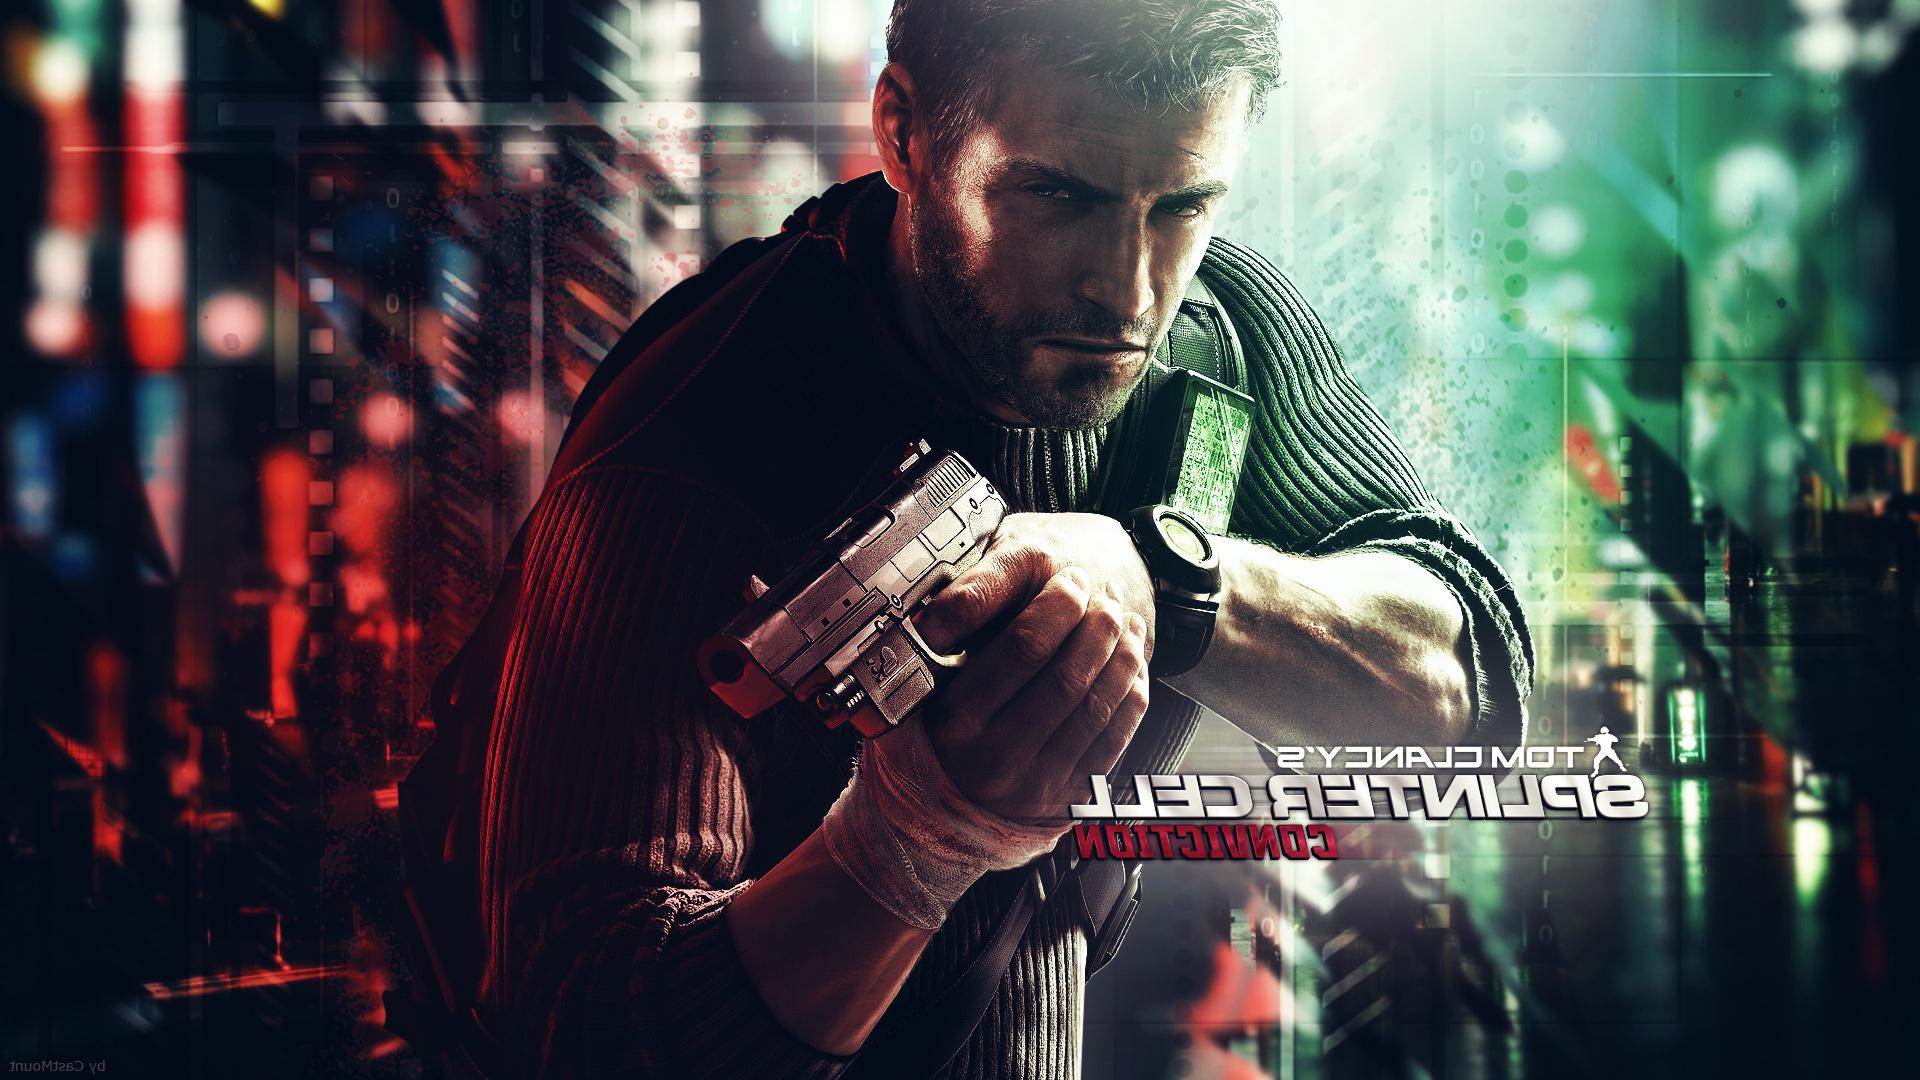 download steamunlocked splinter cell conviction for free